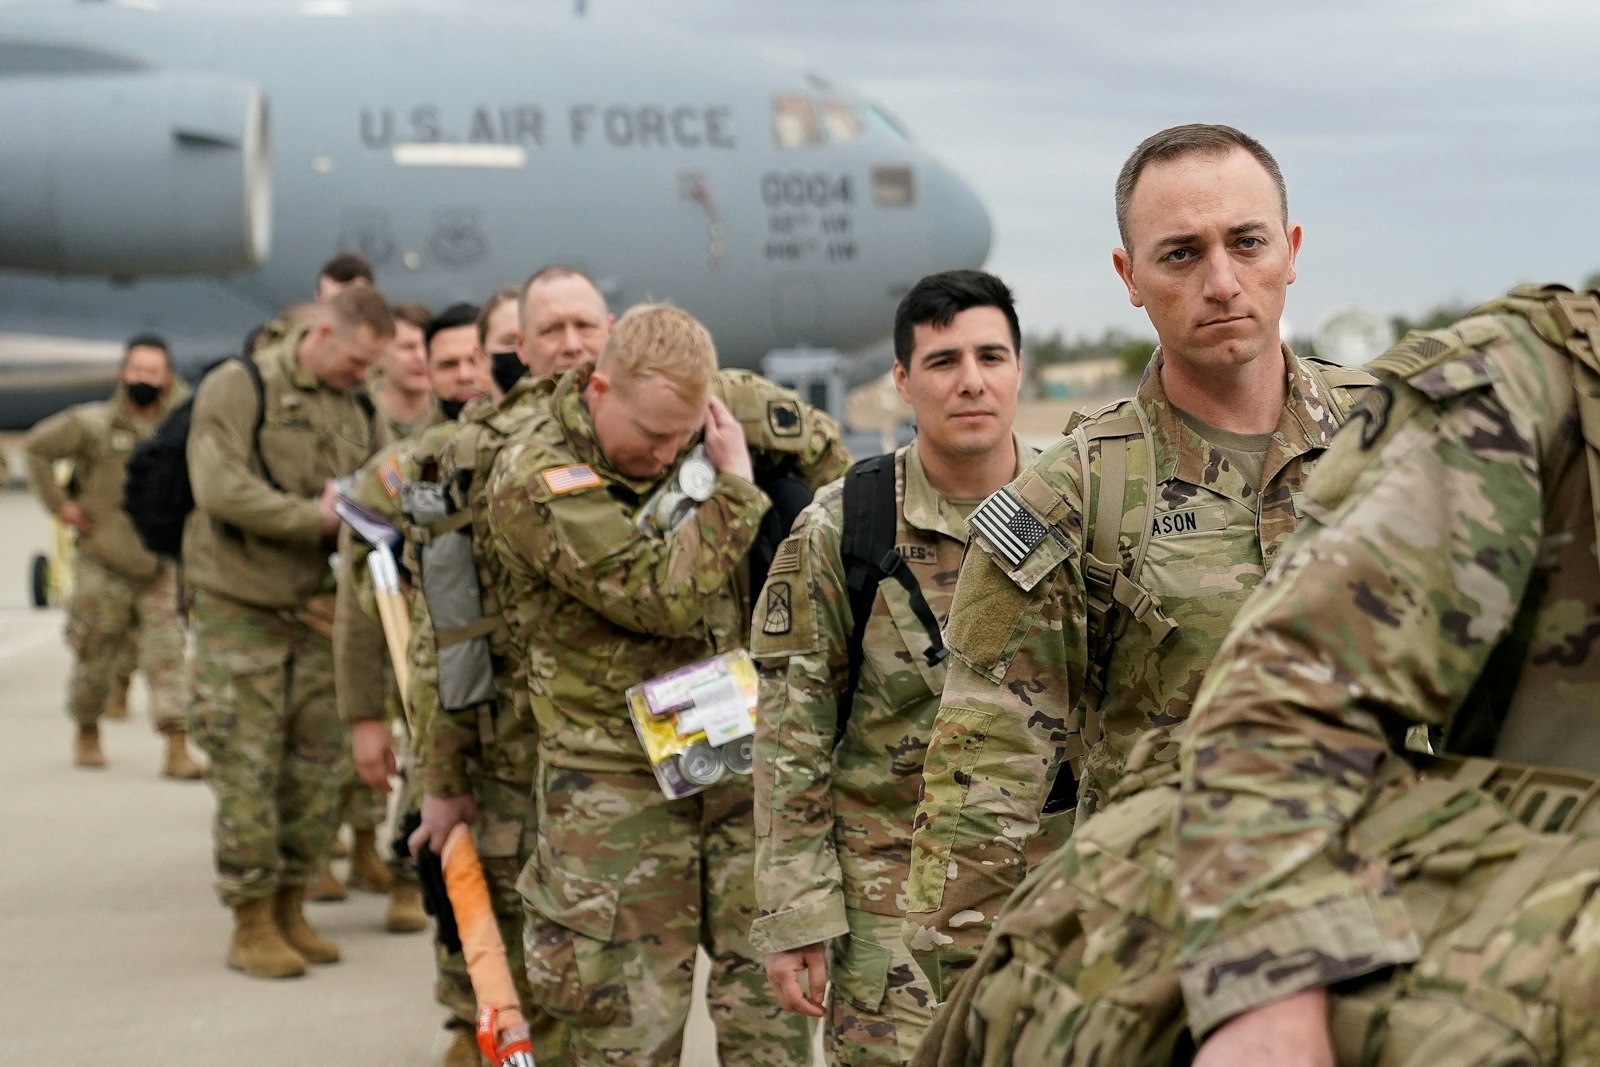 Military personnel from the 82nd Airborne Division and 18th Airborne Corps in Fort Bragg, N.C., board a C-17 transport plane for deployment to Eastern Europe Feb. 3, 2022, amid escalating tensions between Ukraine and Russia. (CNS photo/Bryan Woolston, Reuters)